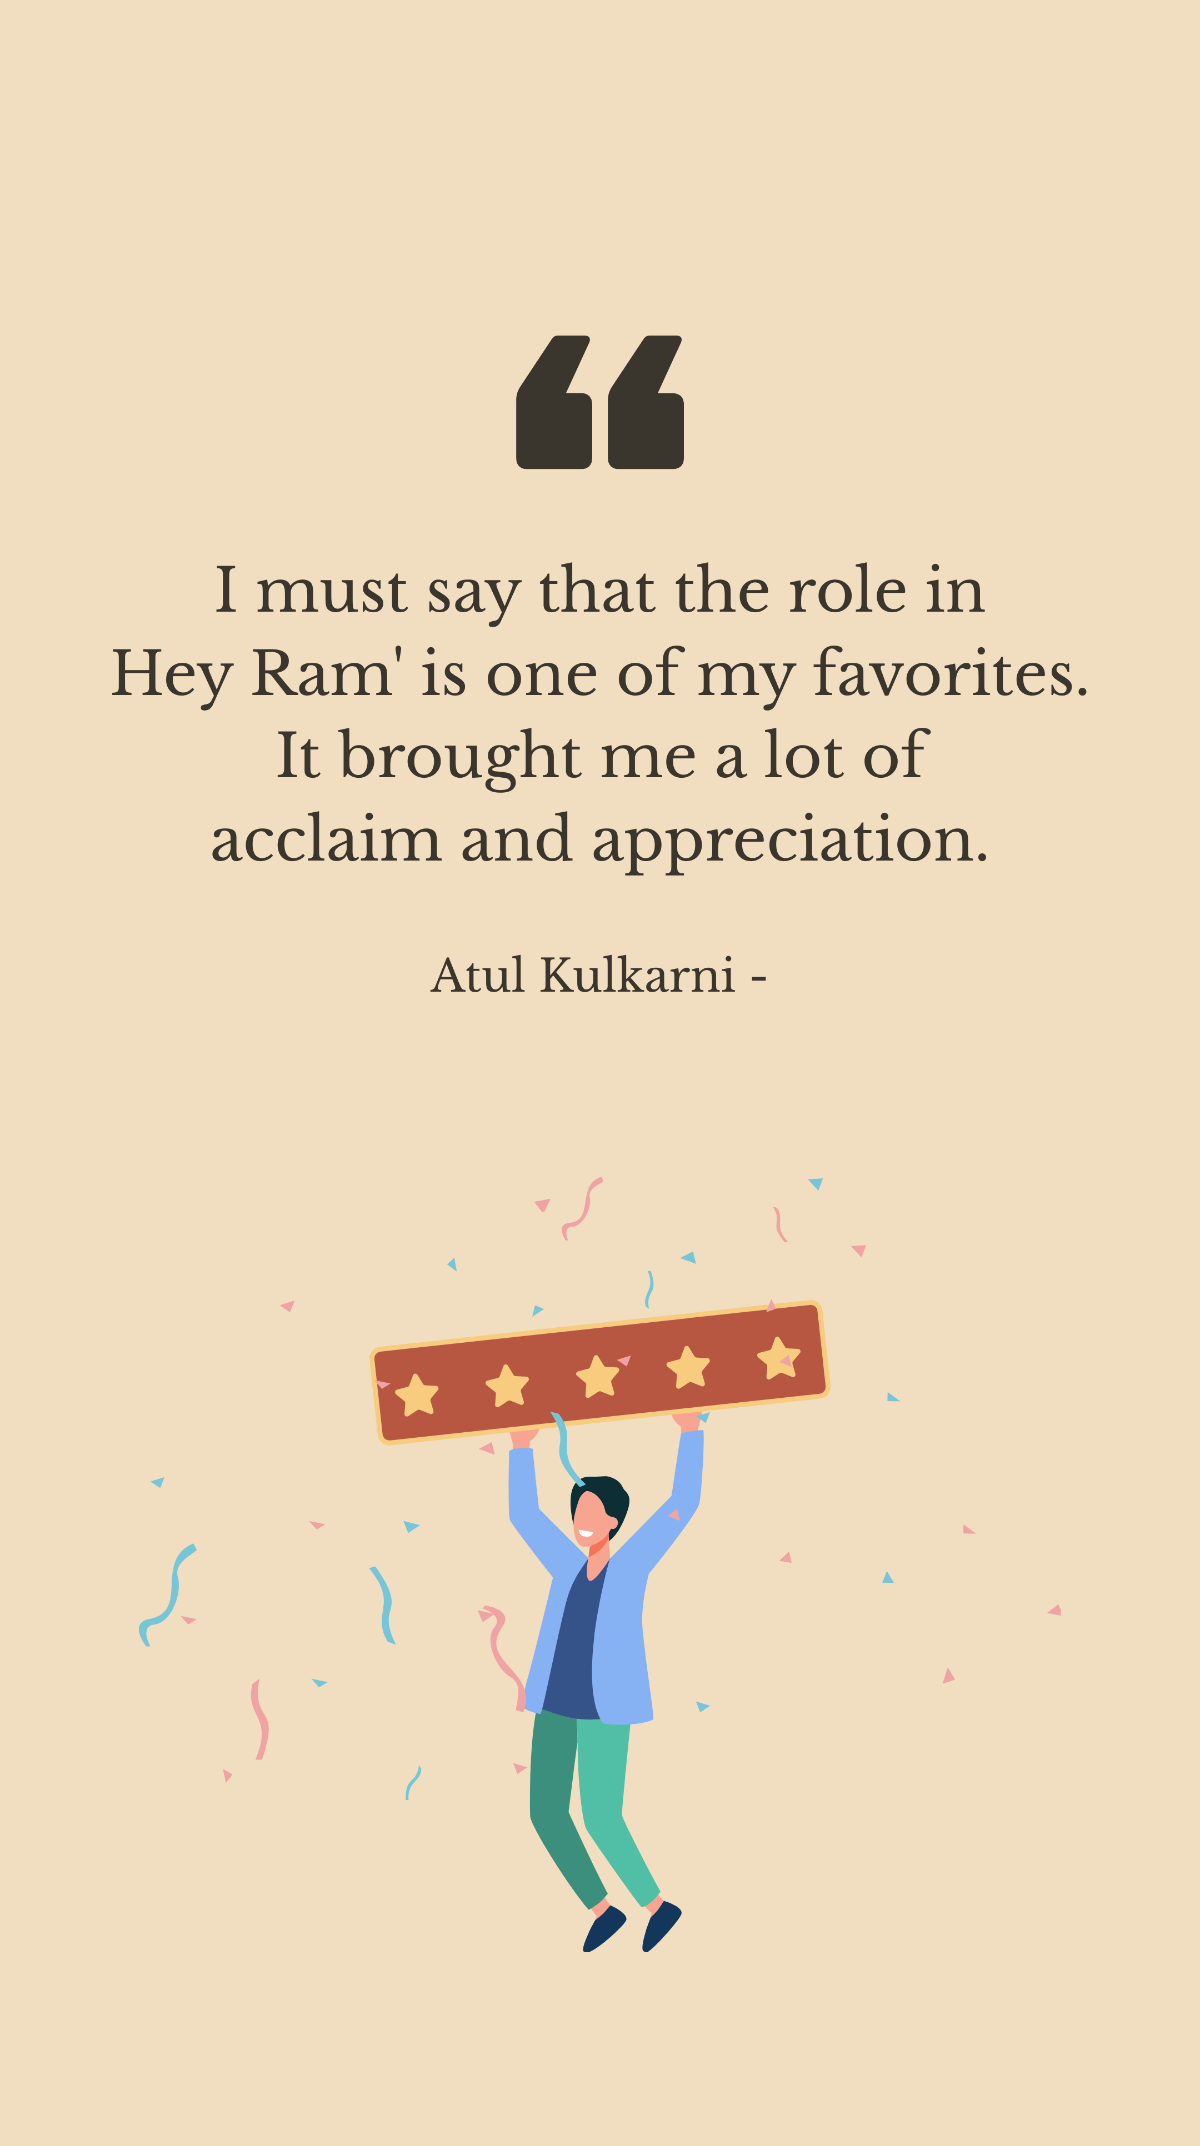 Free Atul Kulkarni - I must say that the role in Hey Ram' is one of my favorites. It brought me a lot of acclaim and appreciation. Template